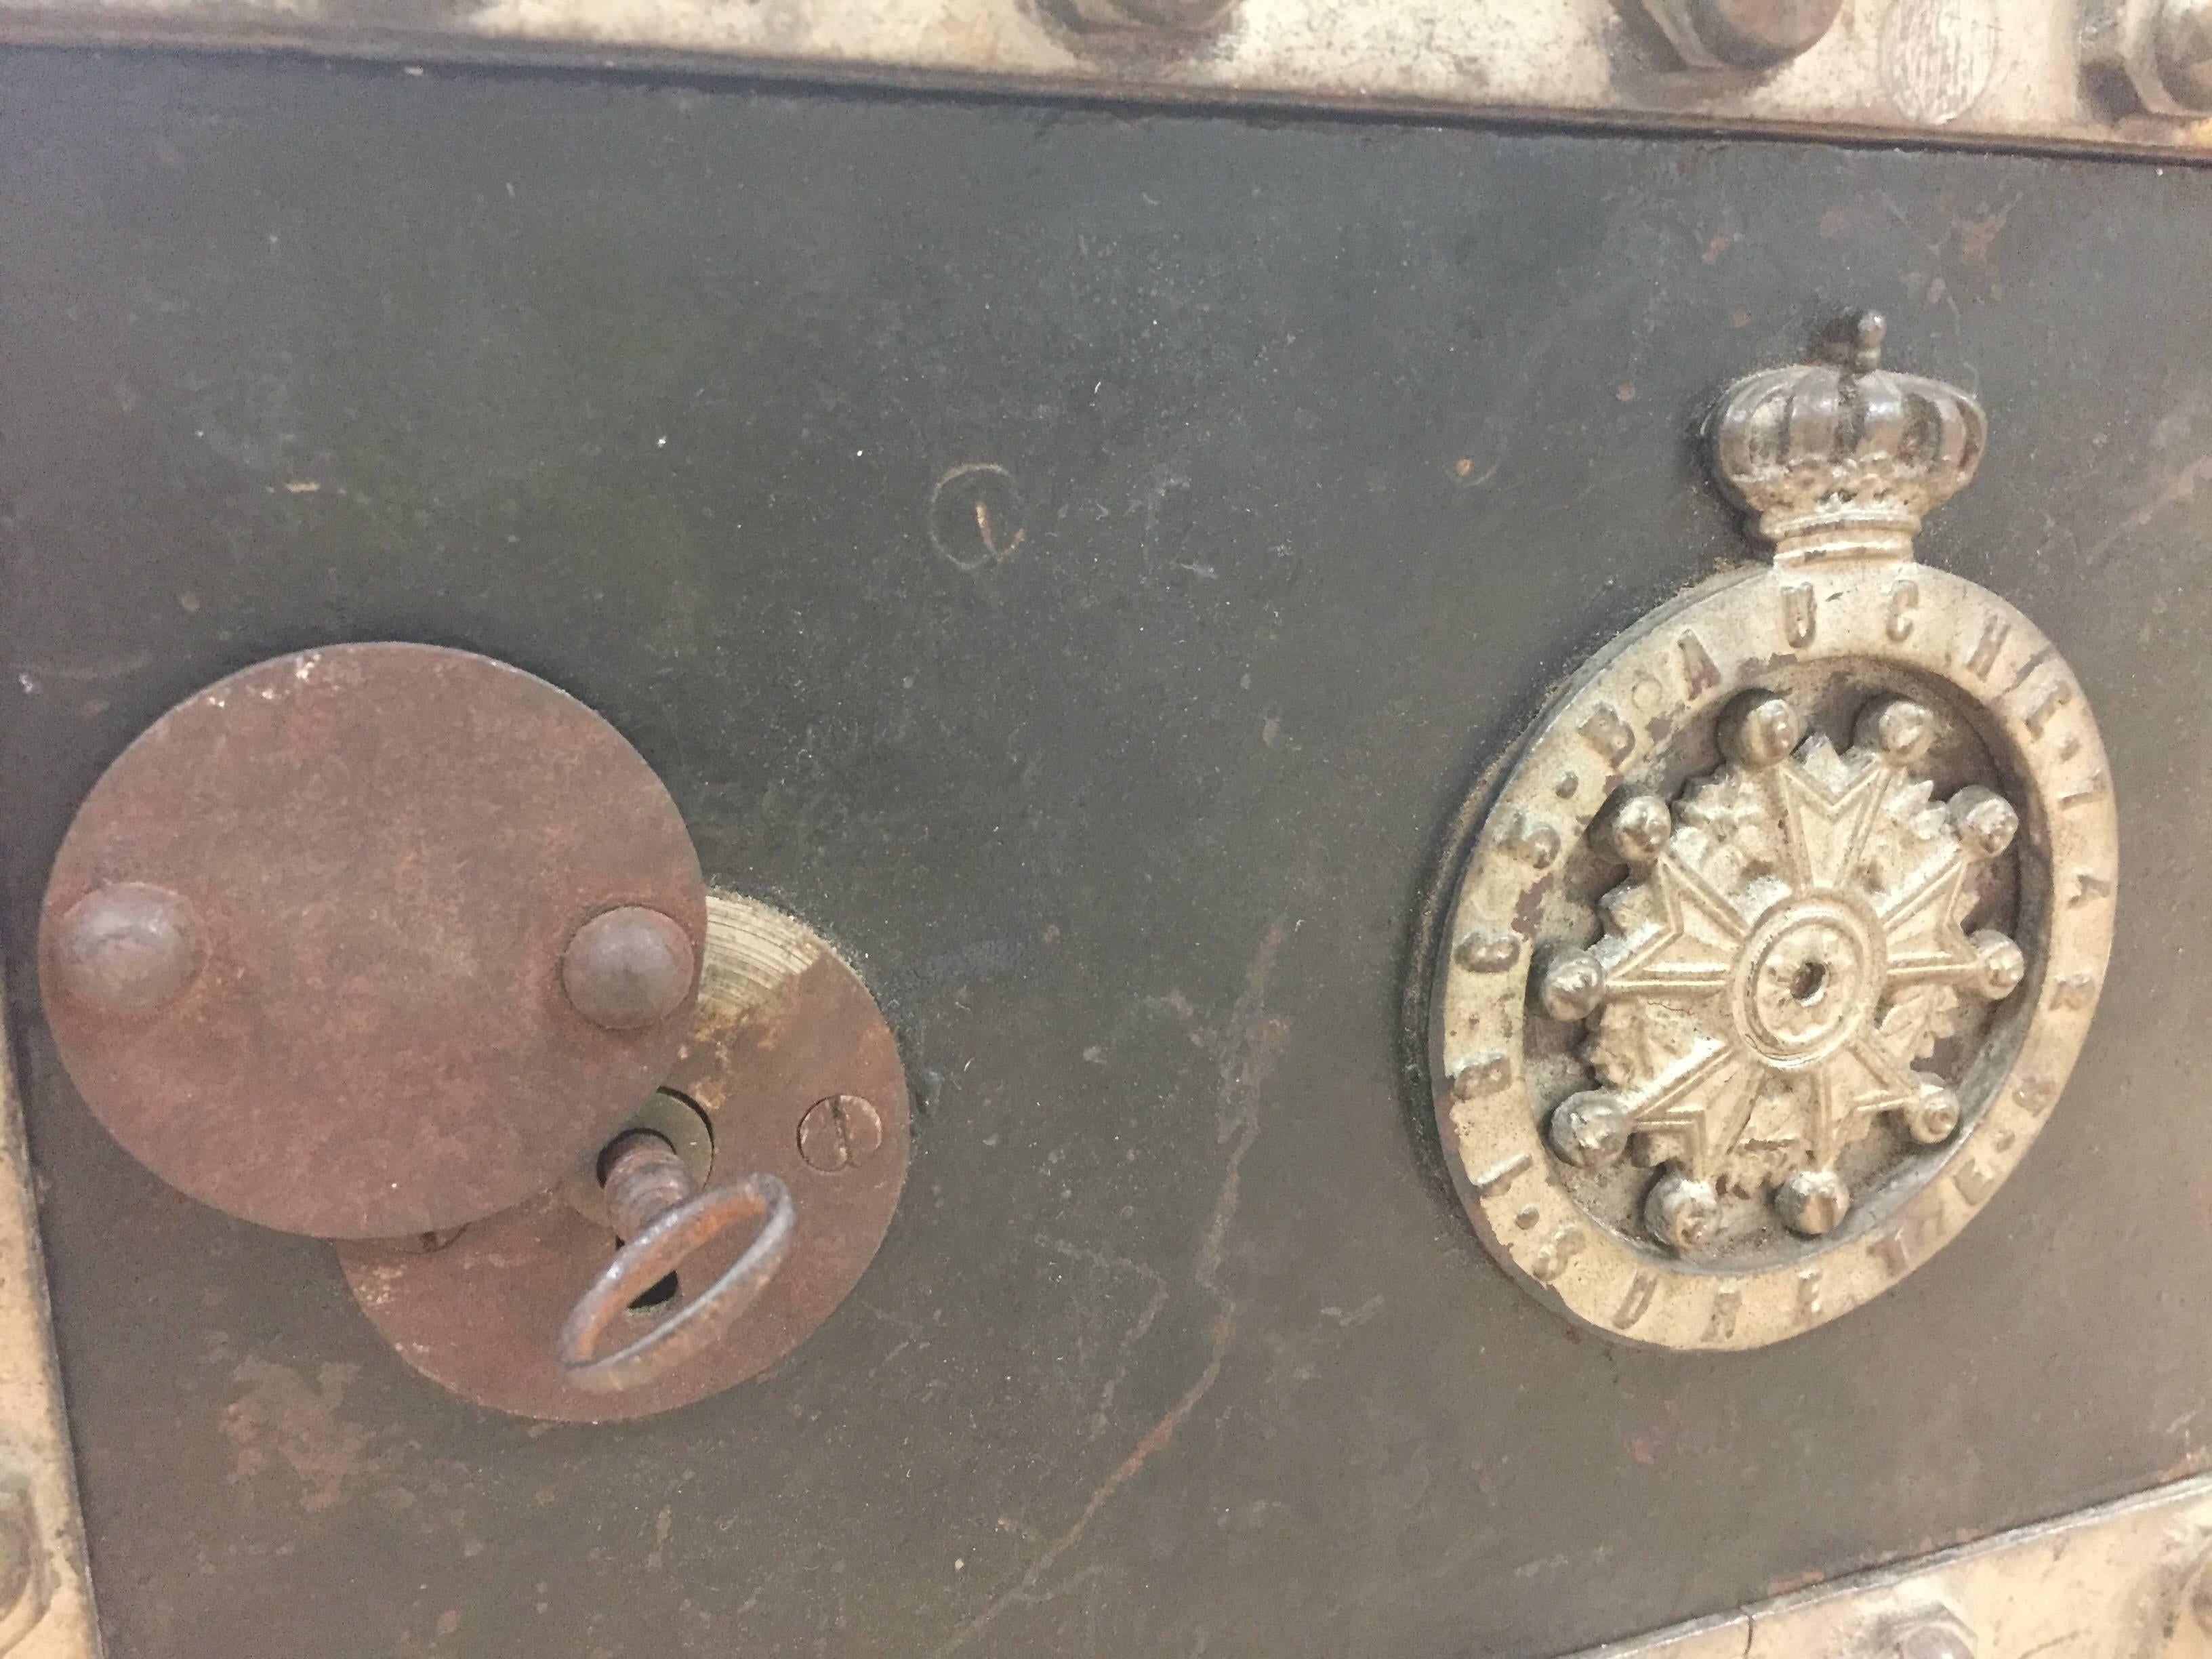 Tara Shaw Antiques - 19c metal coffre safe. A strong box, safe meant for storing weapons such as fire arms. Condition typical of antique items.